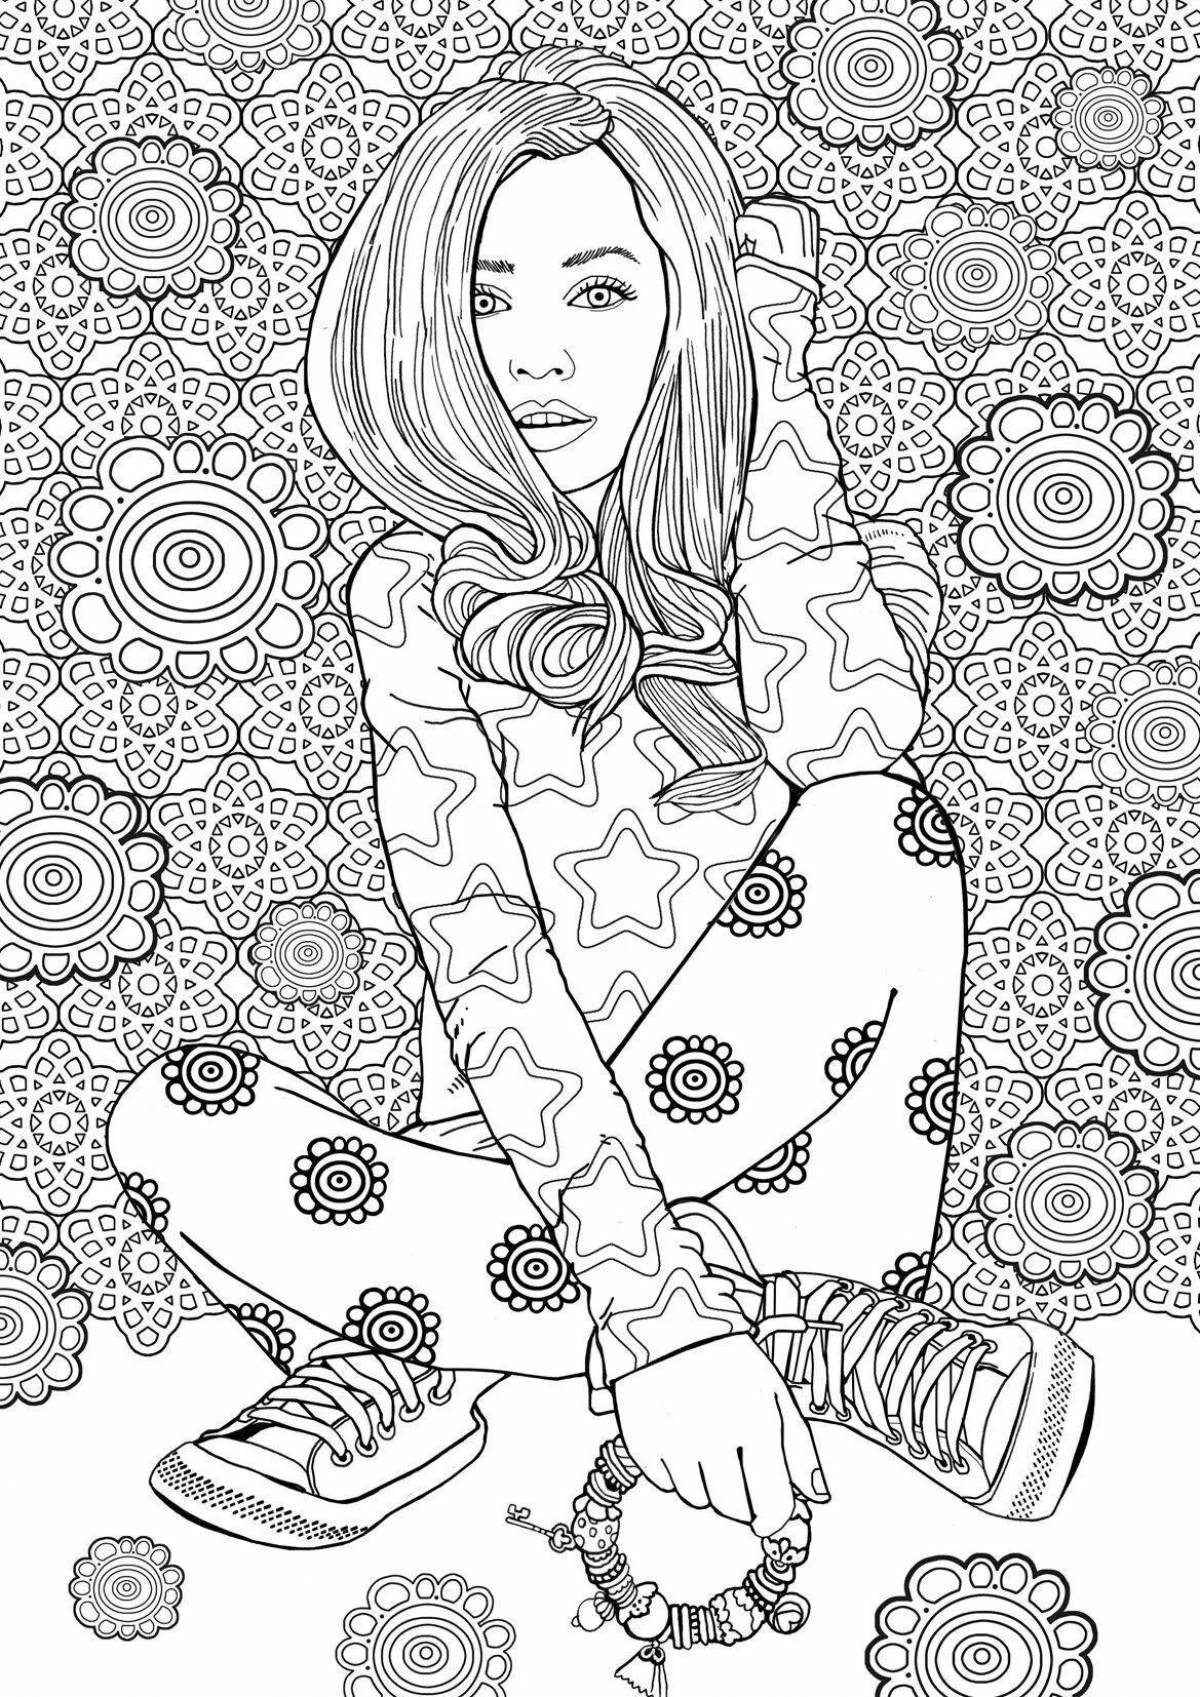 Creative modern coloring book for teenagers